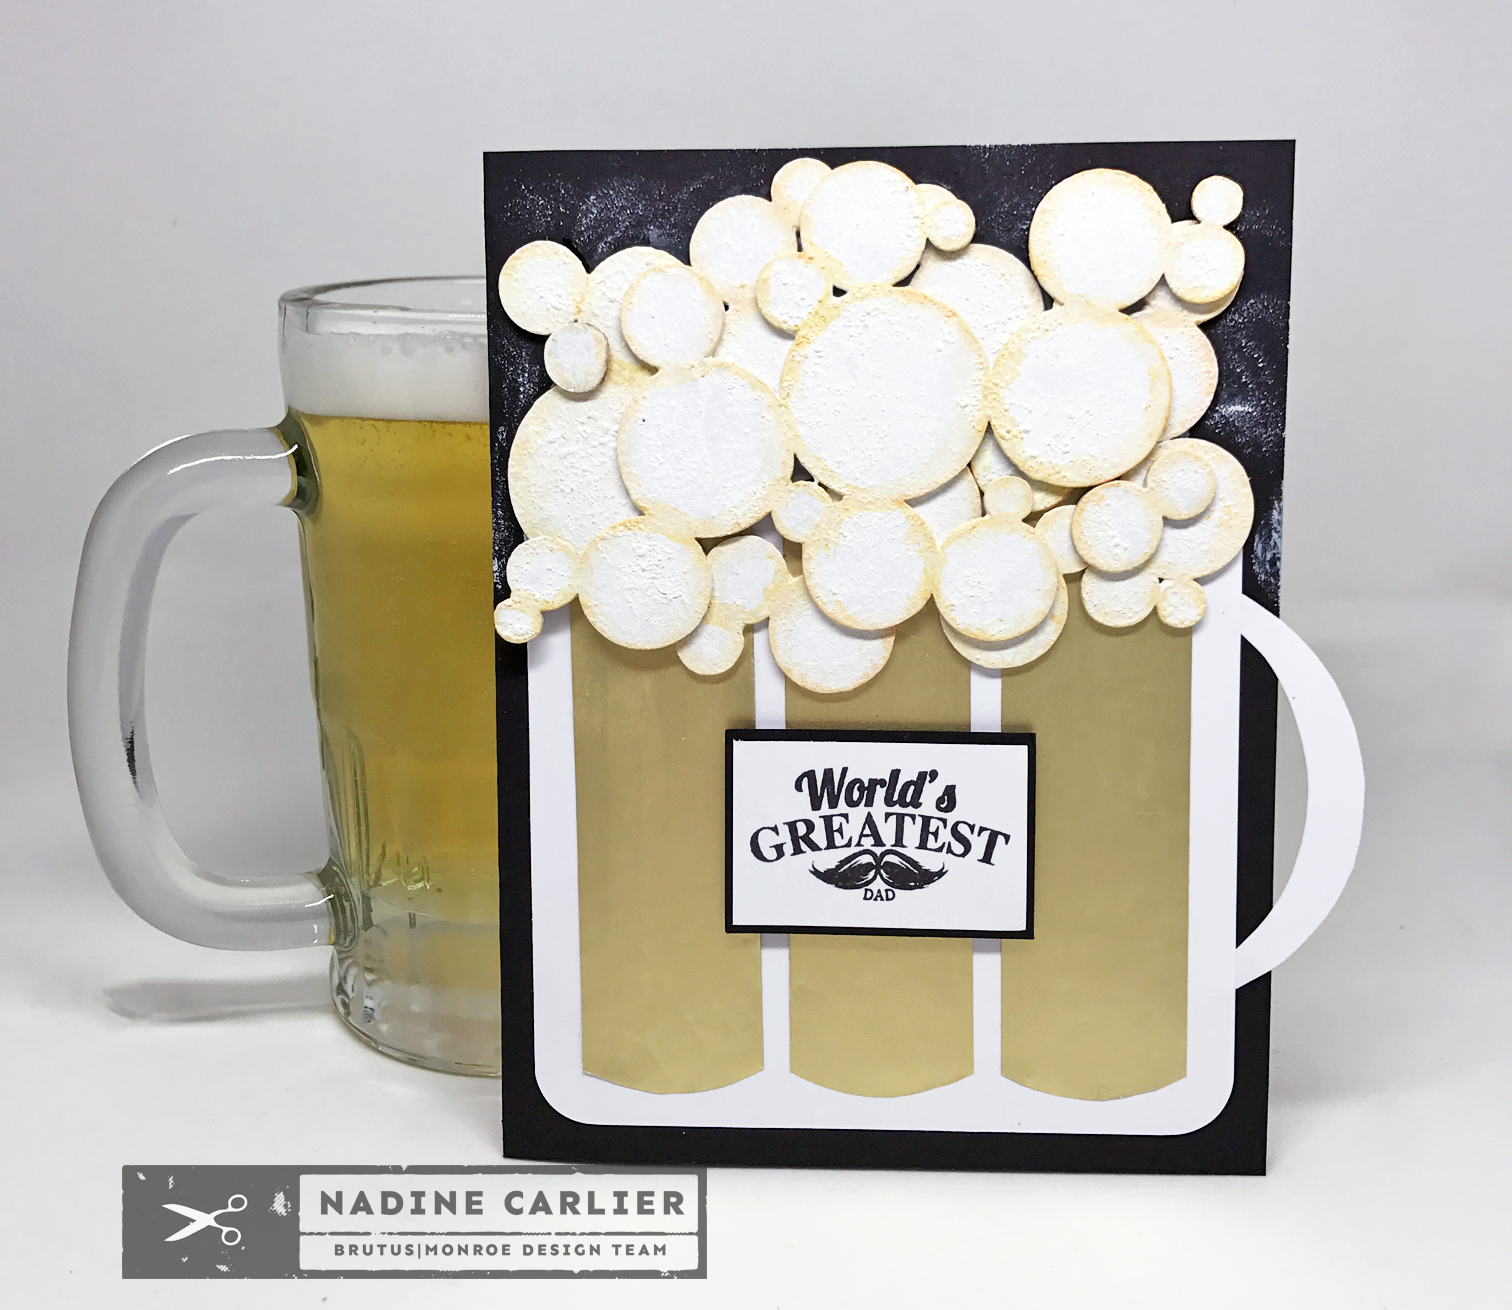 A Nice Cold Beer Father's Day Card by Nadine Carlier